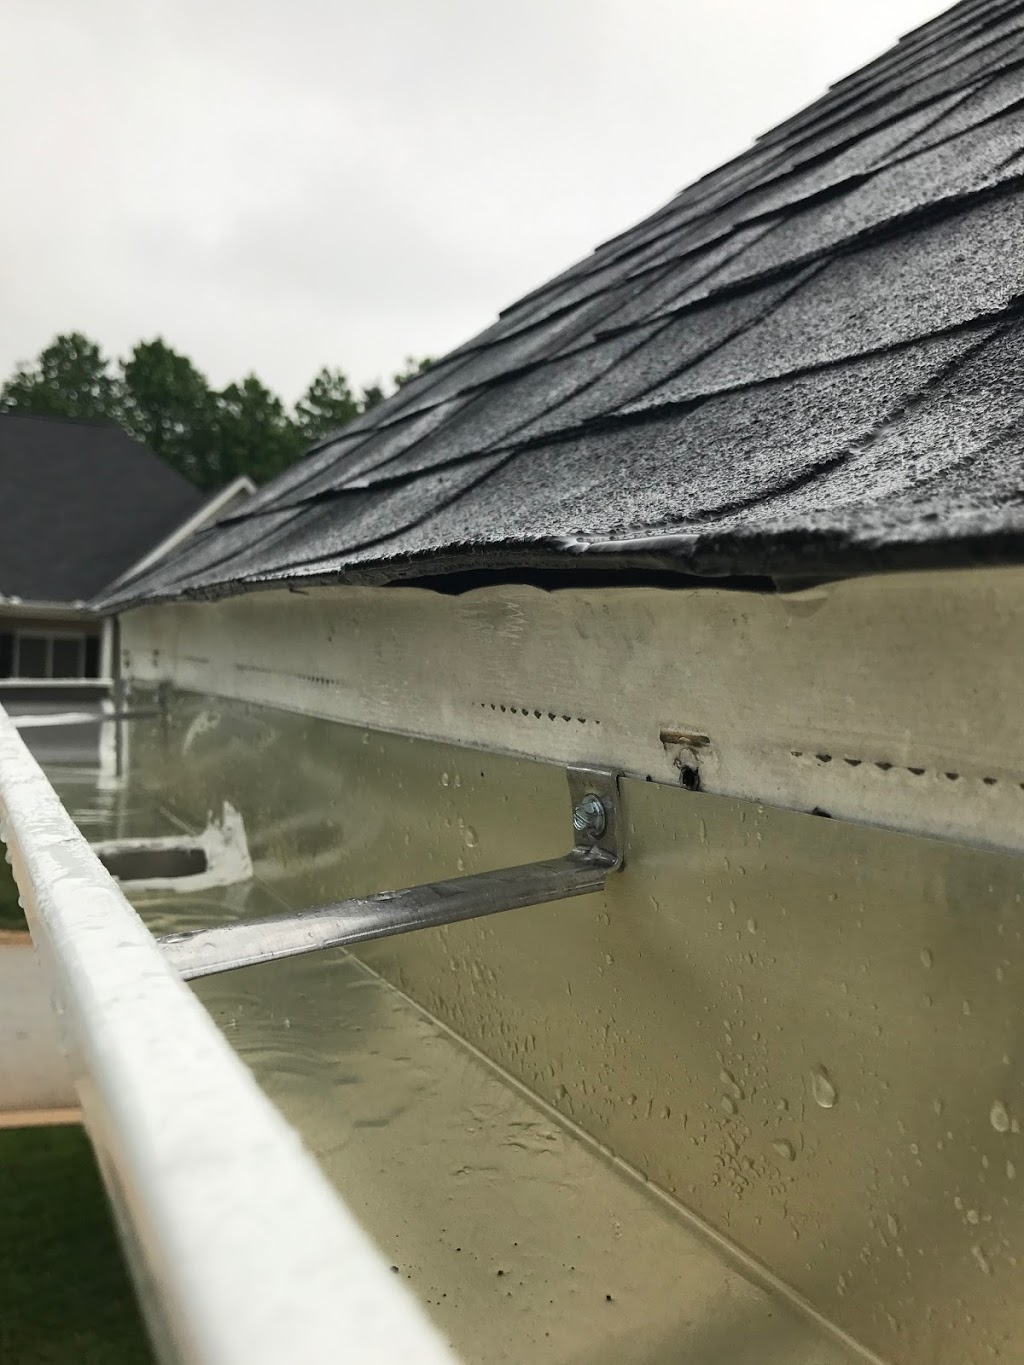 Browns Roofing LLC | 3249 SC-324, Rock Hill, SC 29732 | Phone: (803) 980-7663